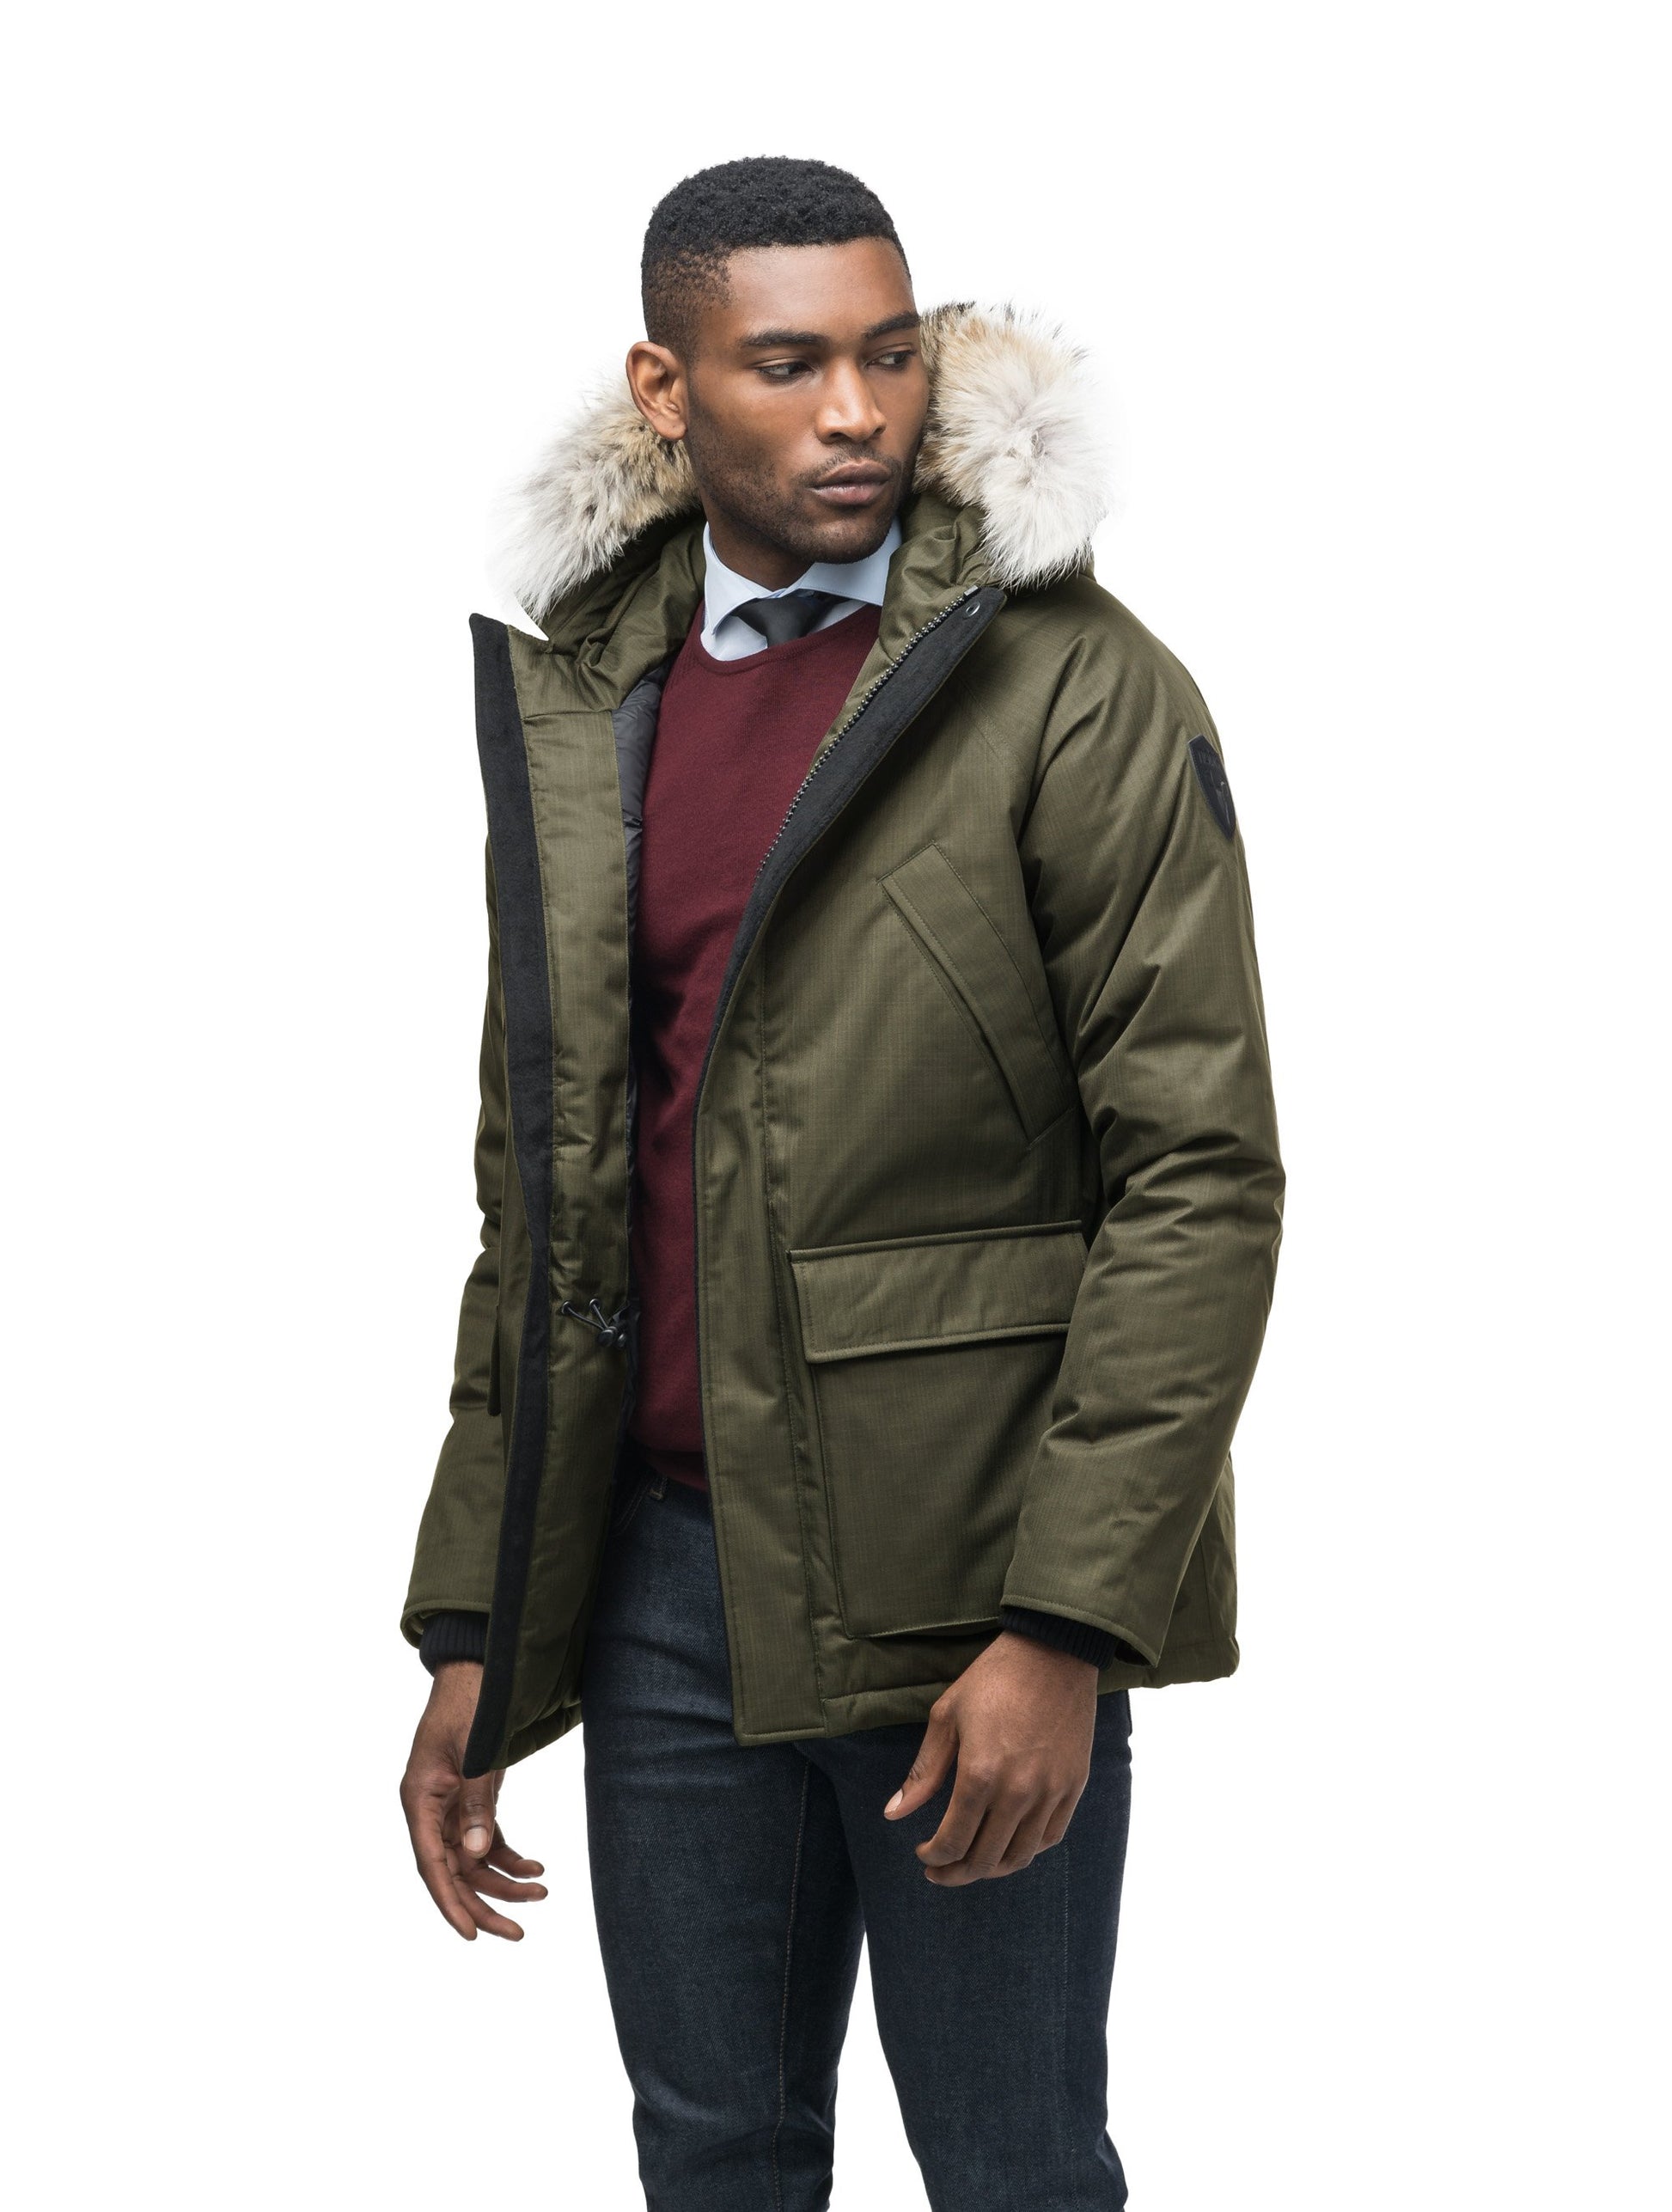 Men's waist length down filled jacket with two front pockets with magnetic closure and a removable fur trim on the hood in CH Fatigue